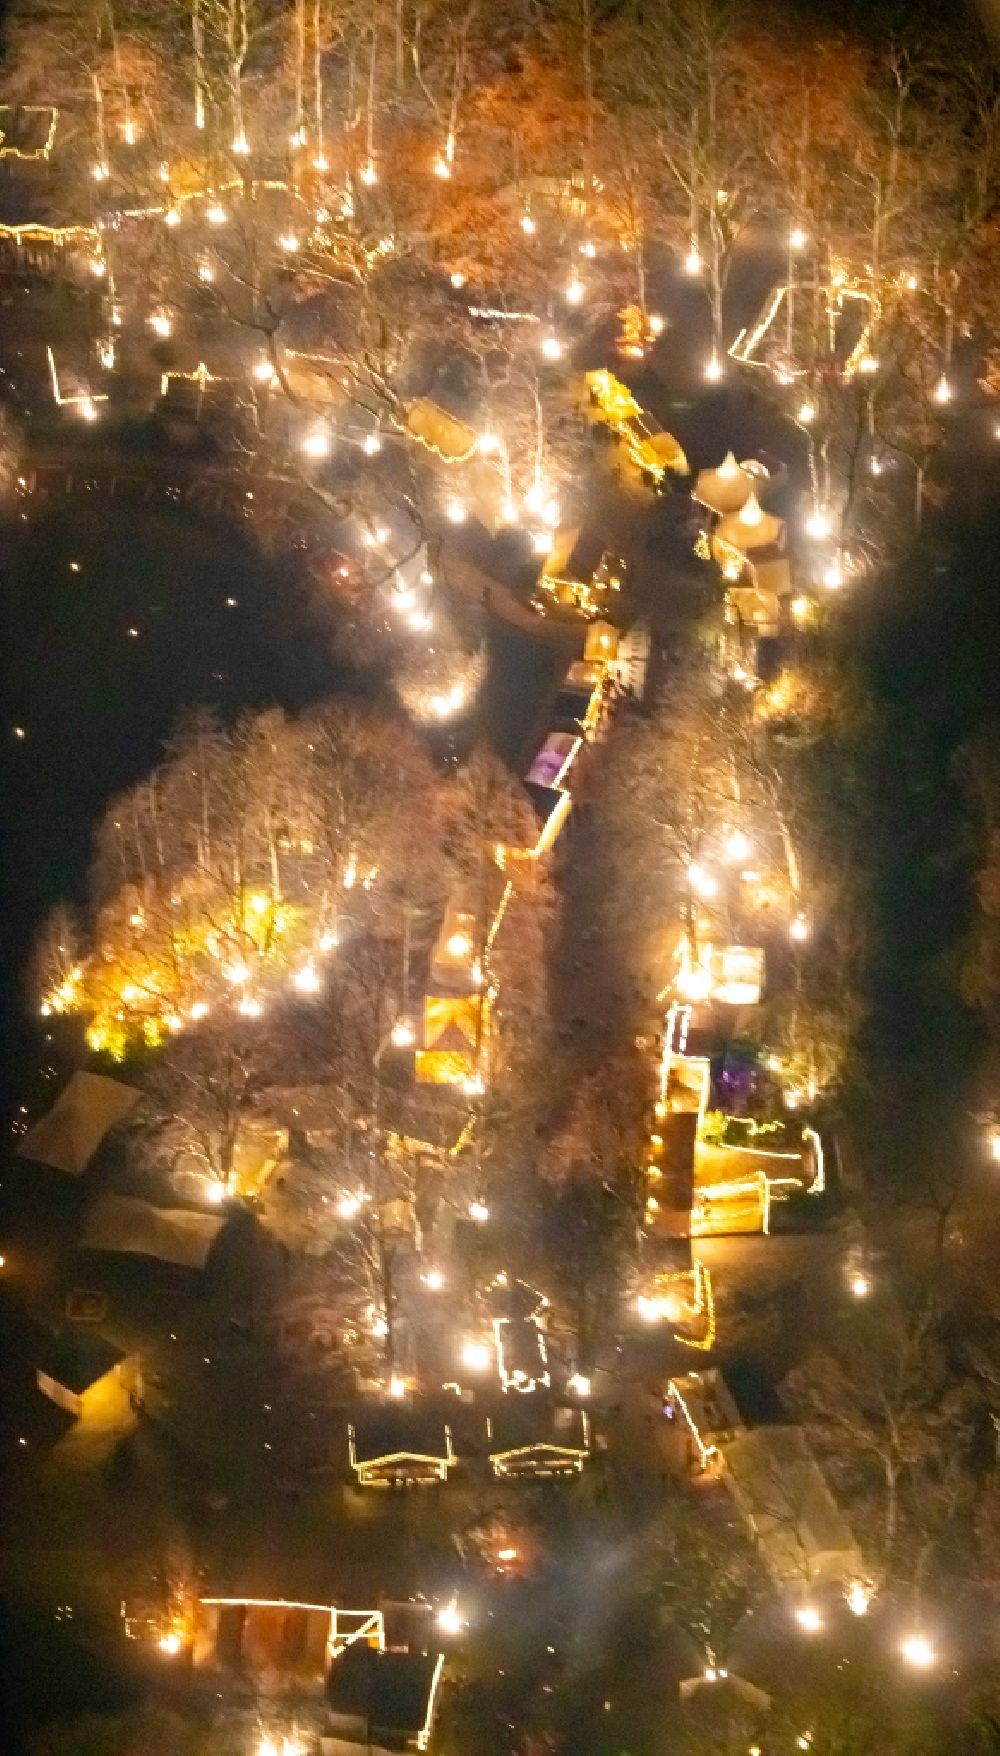 Aerial photograph at night Dortmund - Night lighting christmassy market event grounds and sale huts and booths in Fredenbaumpark in Dortmund in the state North Rhine-Westphalia, Germany